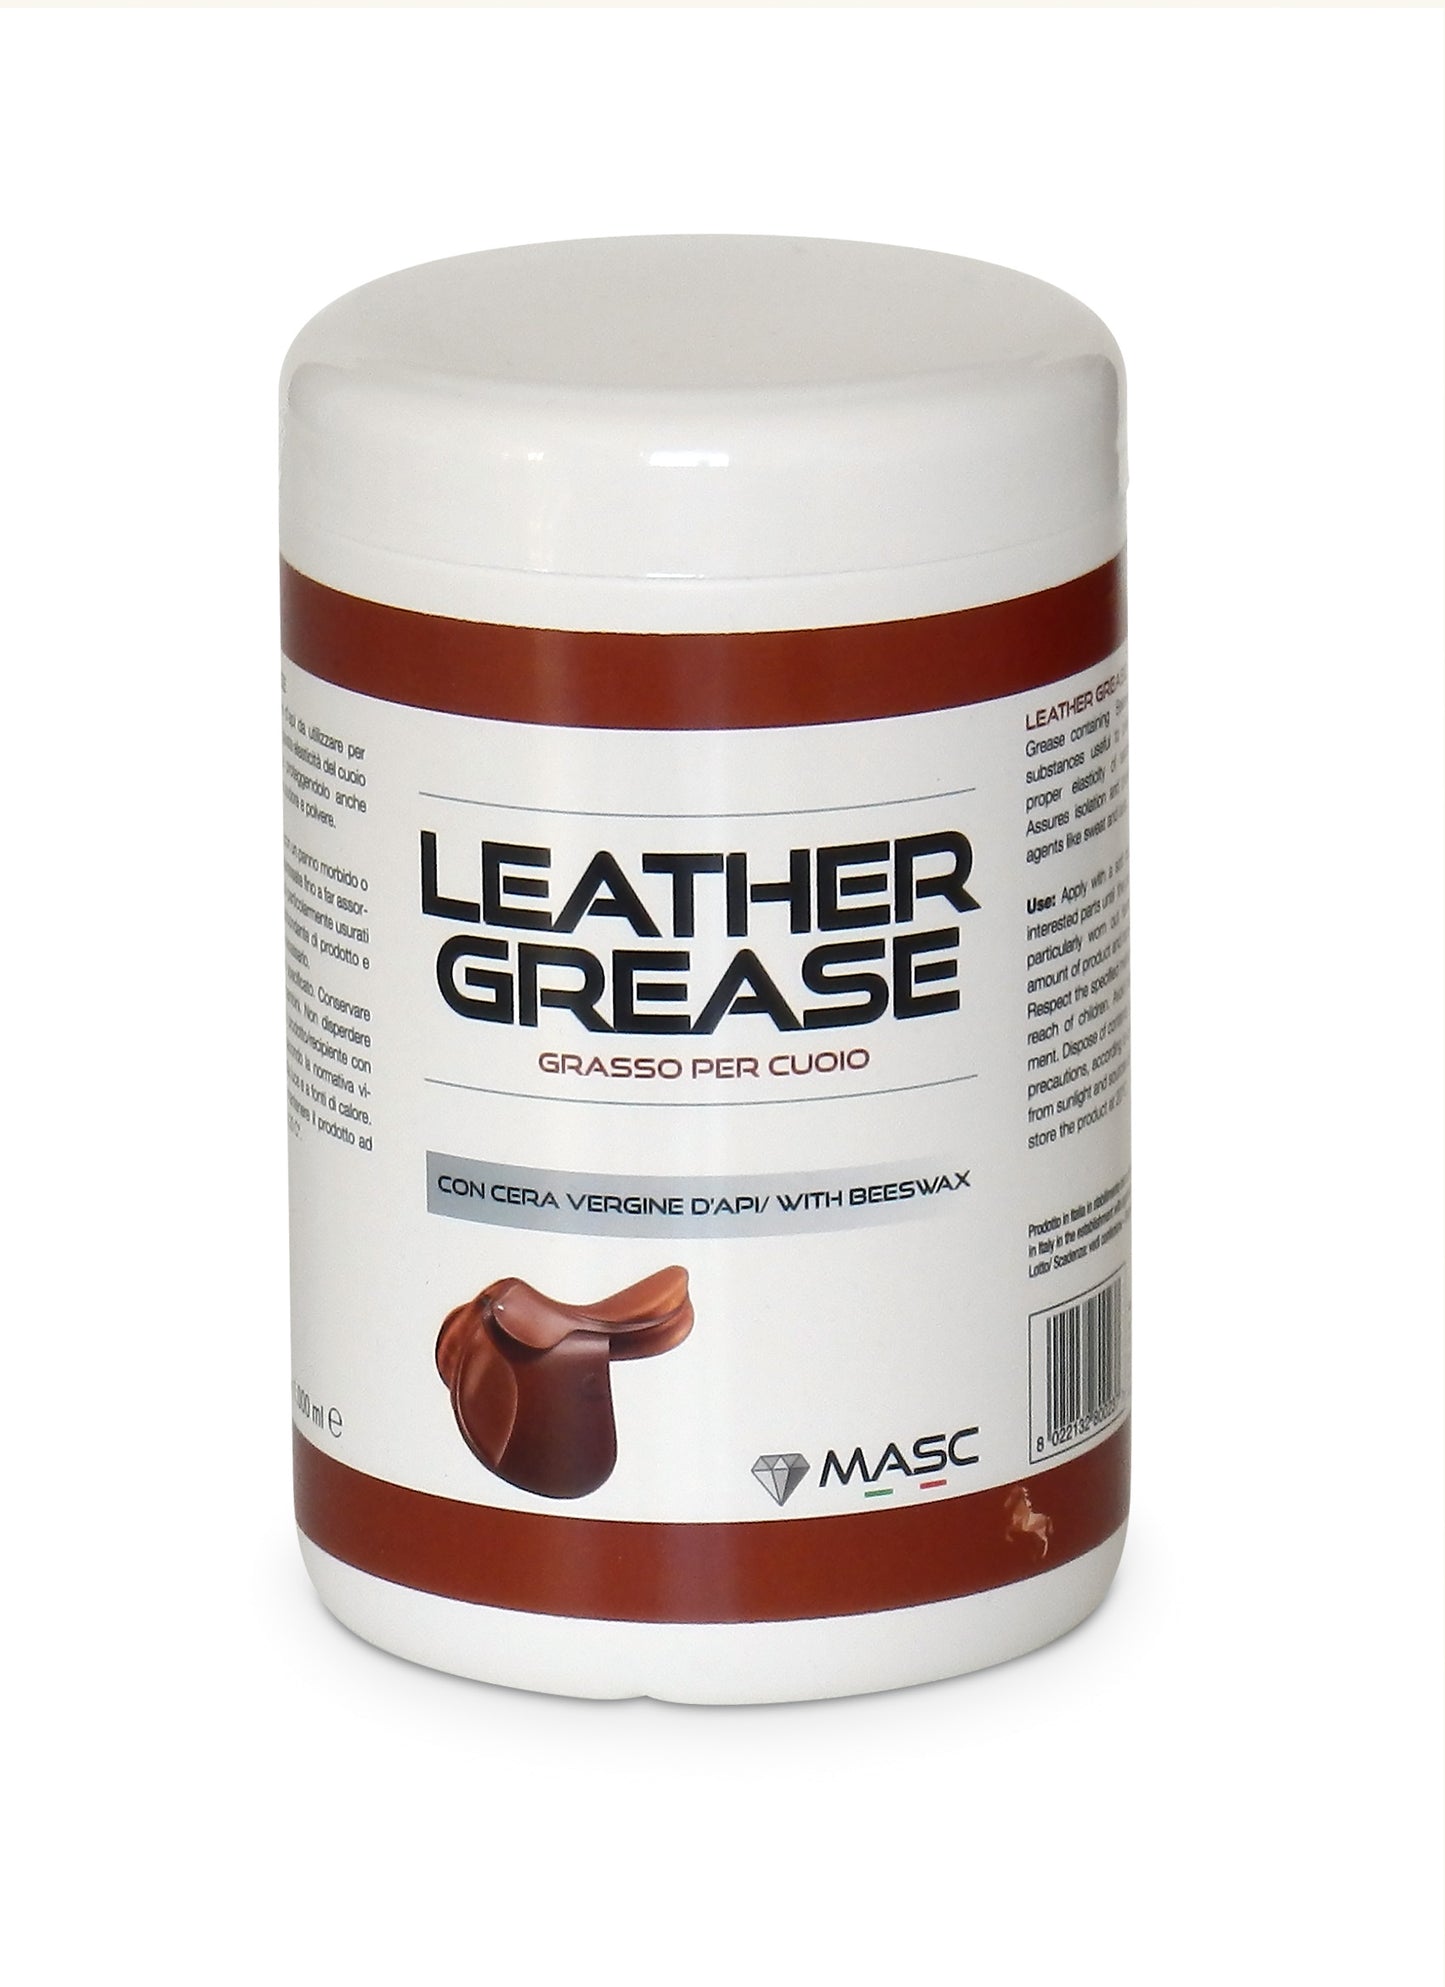 Leather Grease | Virgin Beeswax for Saddle Care